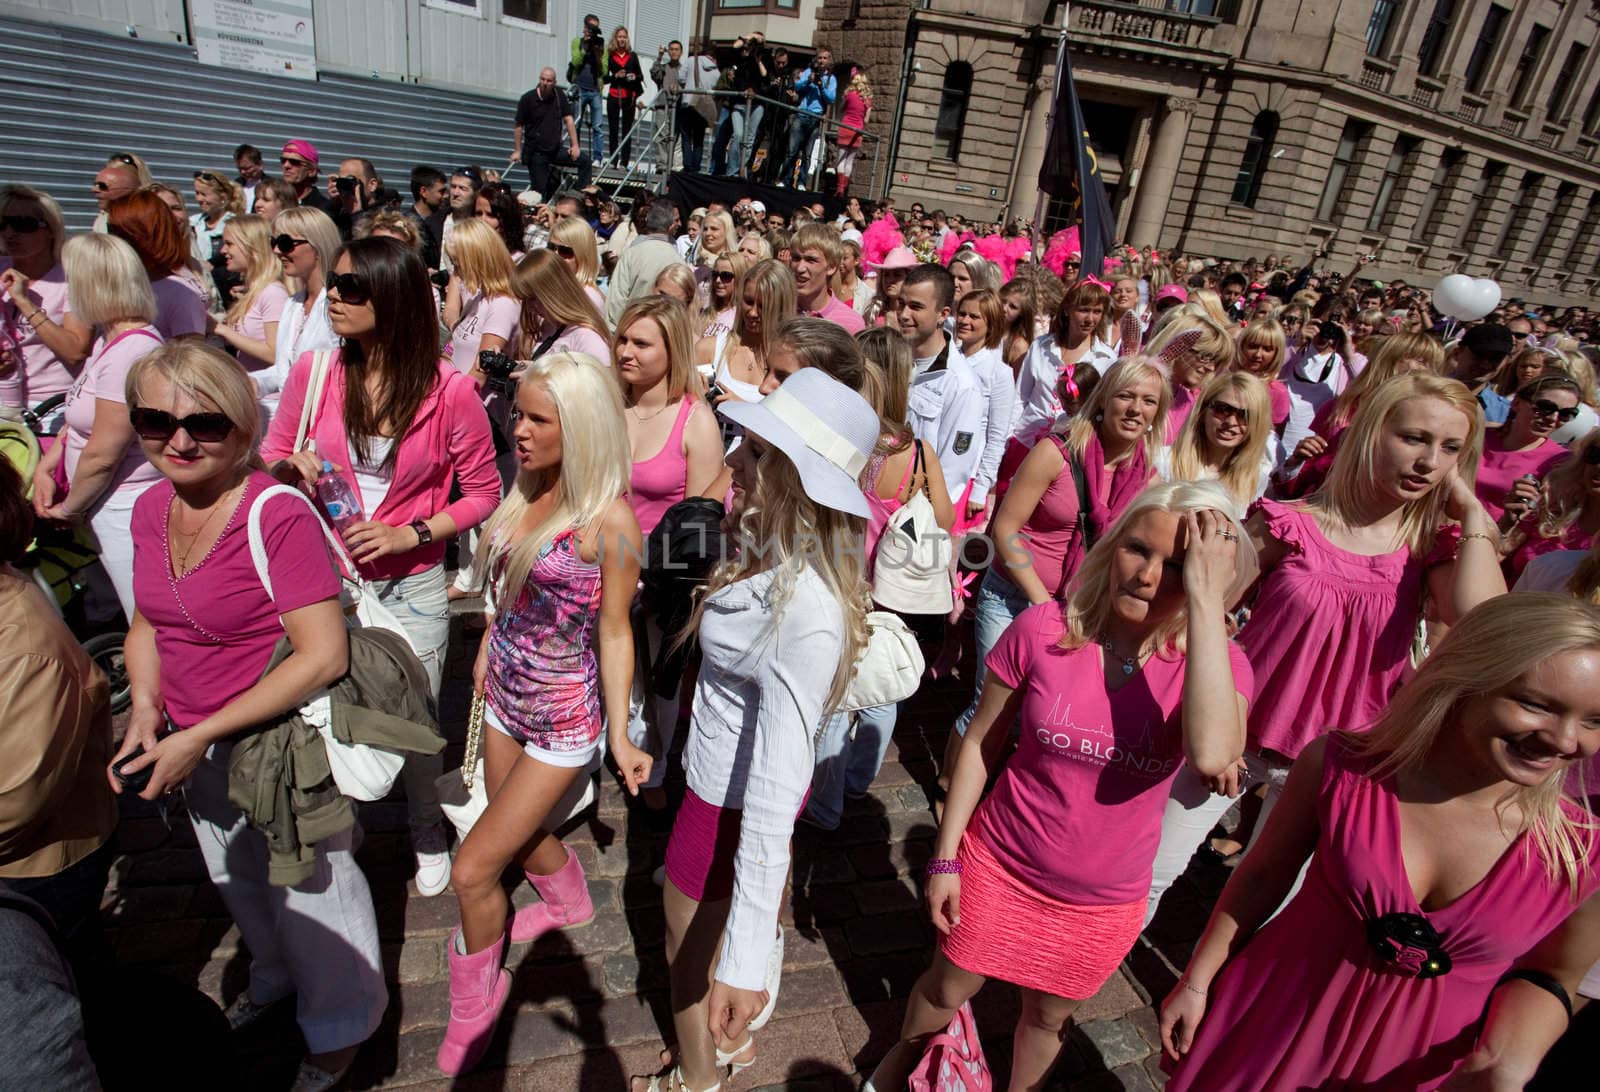 Go Blonde parade in Riga by ints